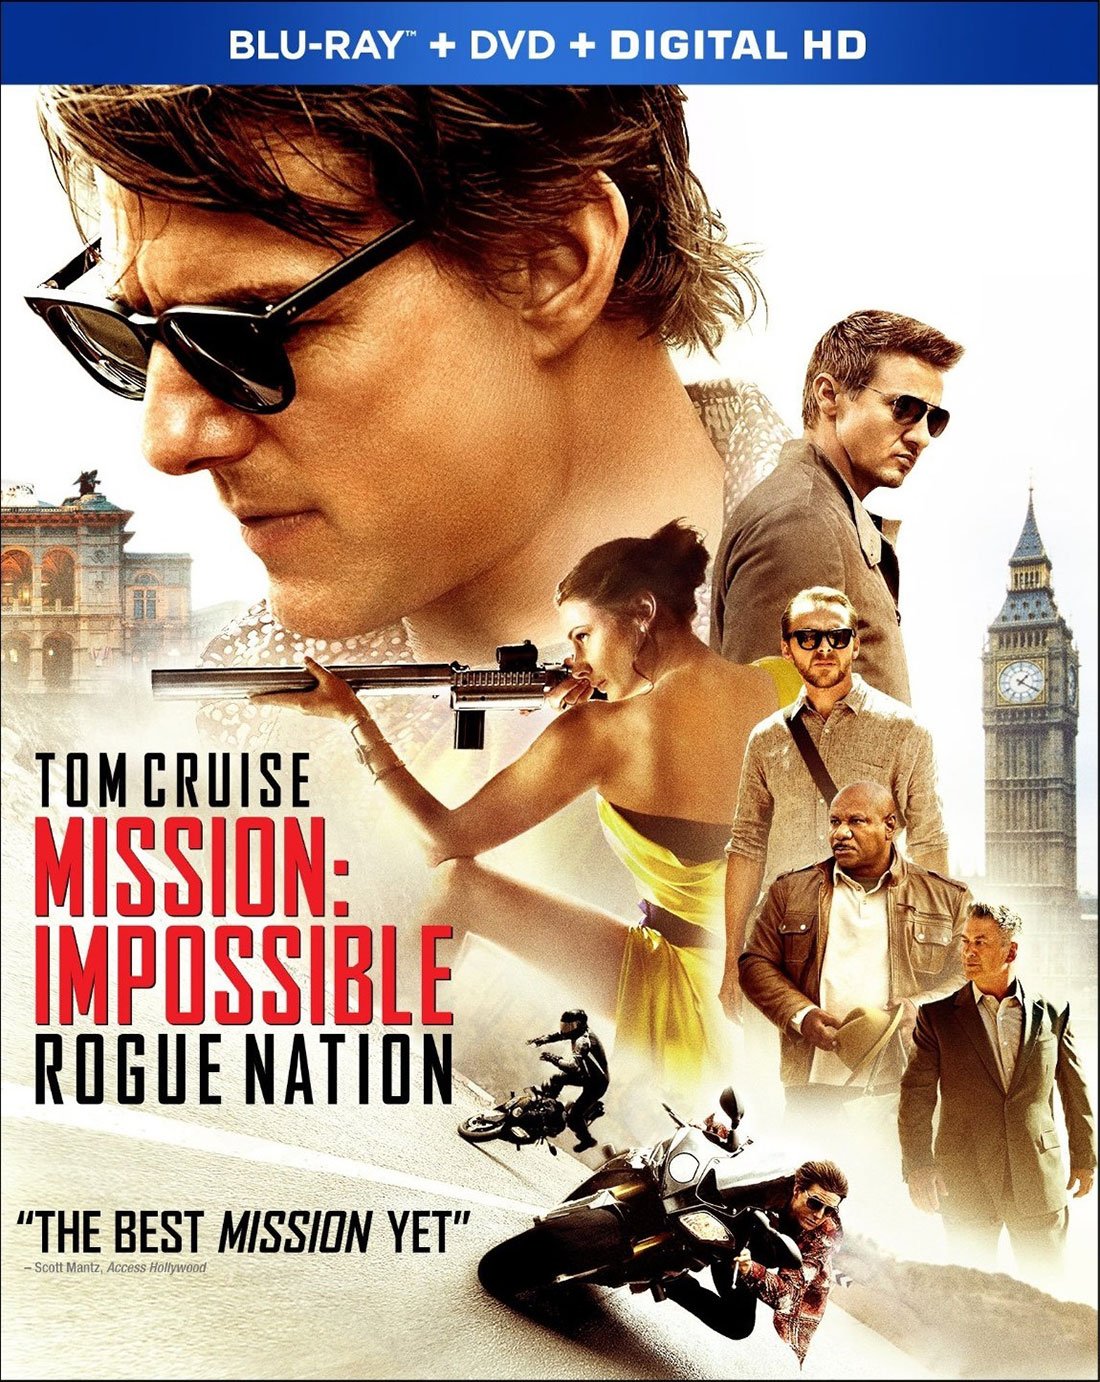 Mission Impossible Rogue Nation dolby Atmos Blu-ray